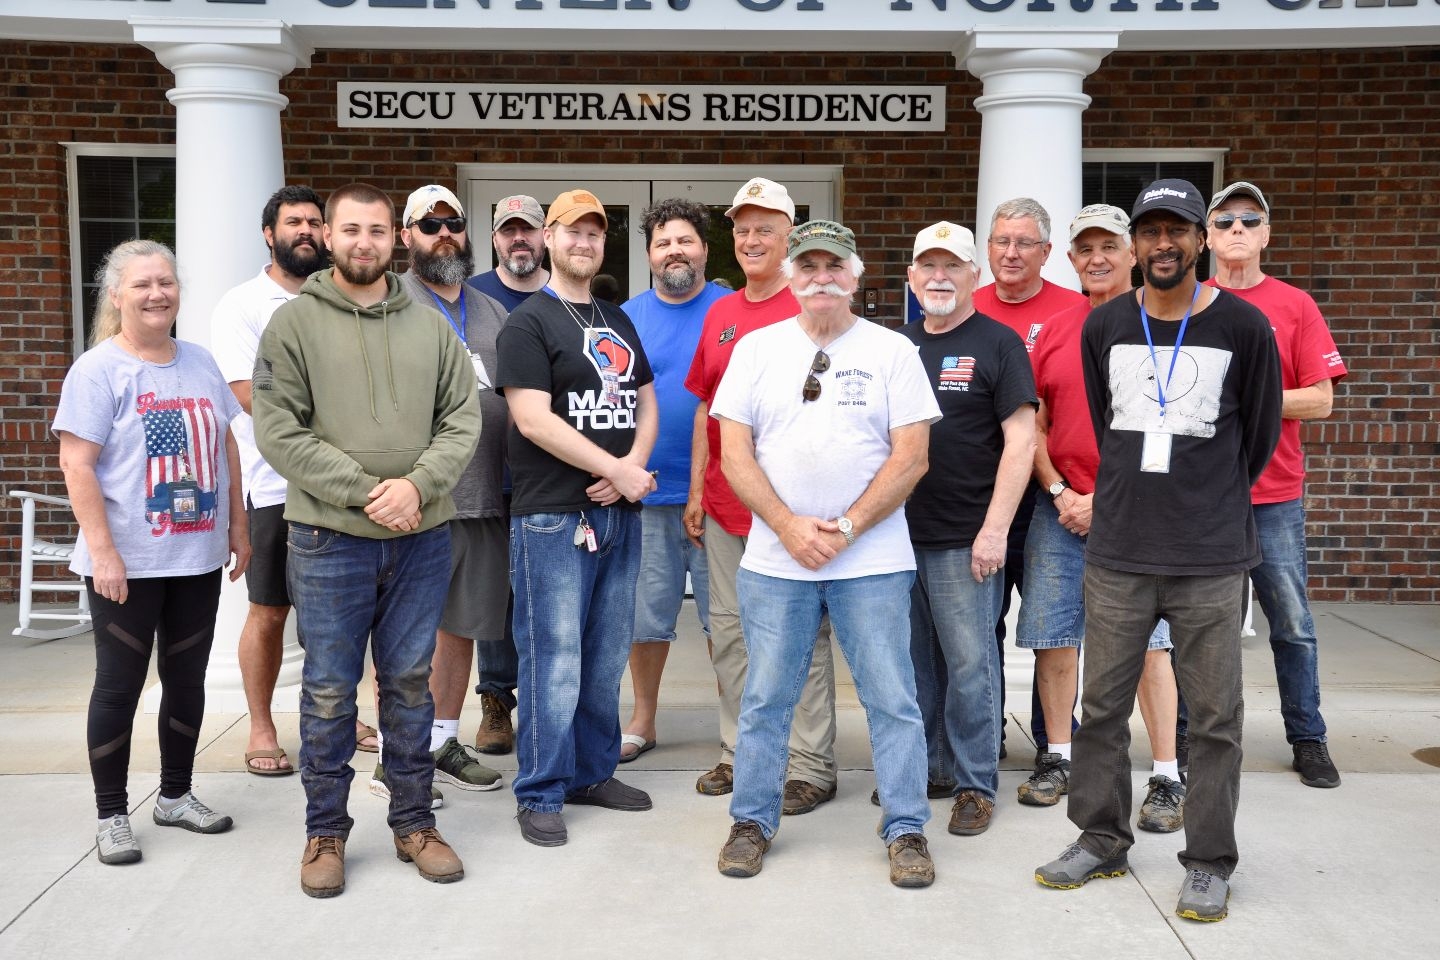 Members of Post 8466 and residents of the Veterans Life Center in Butner, NC celebrate a successful day of groundskeeping at the residence.